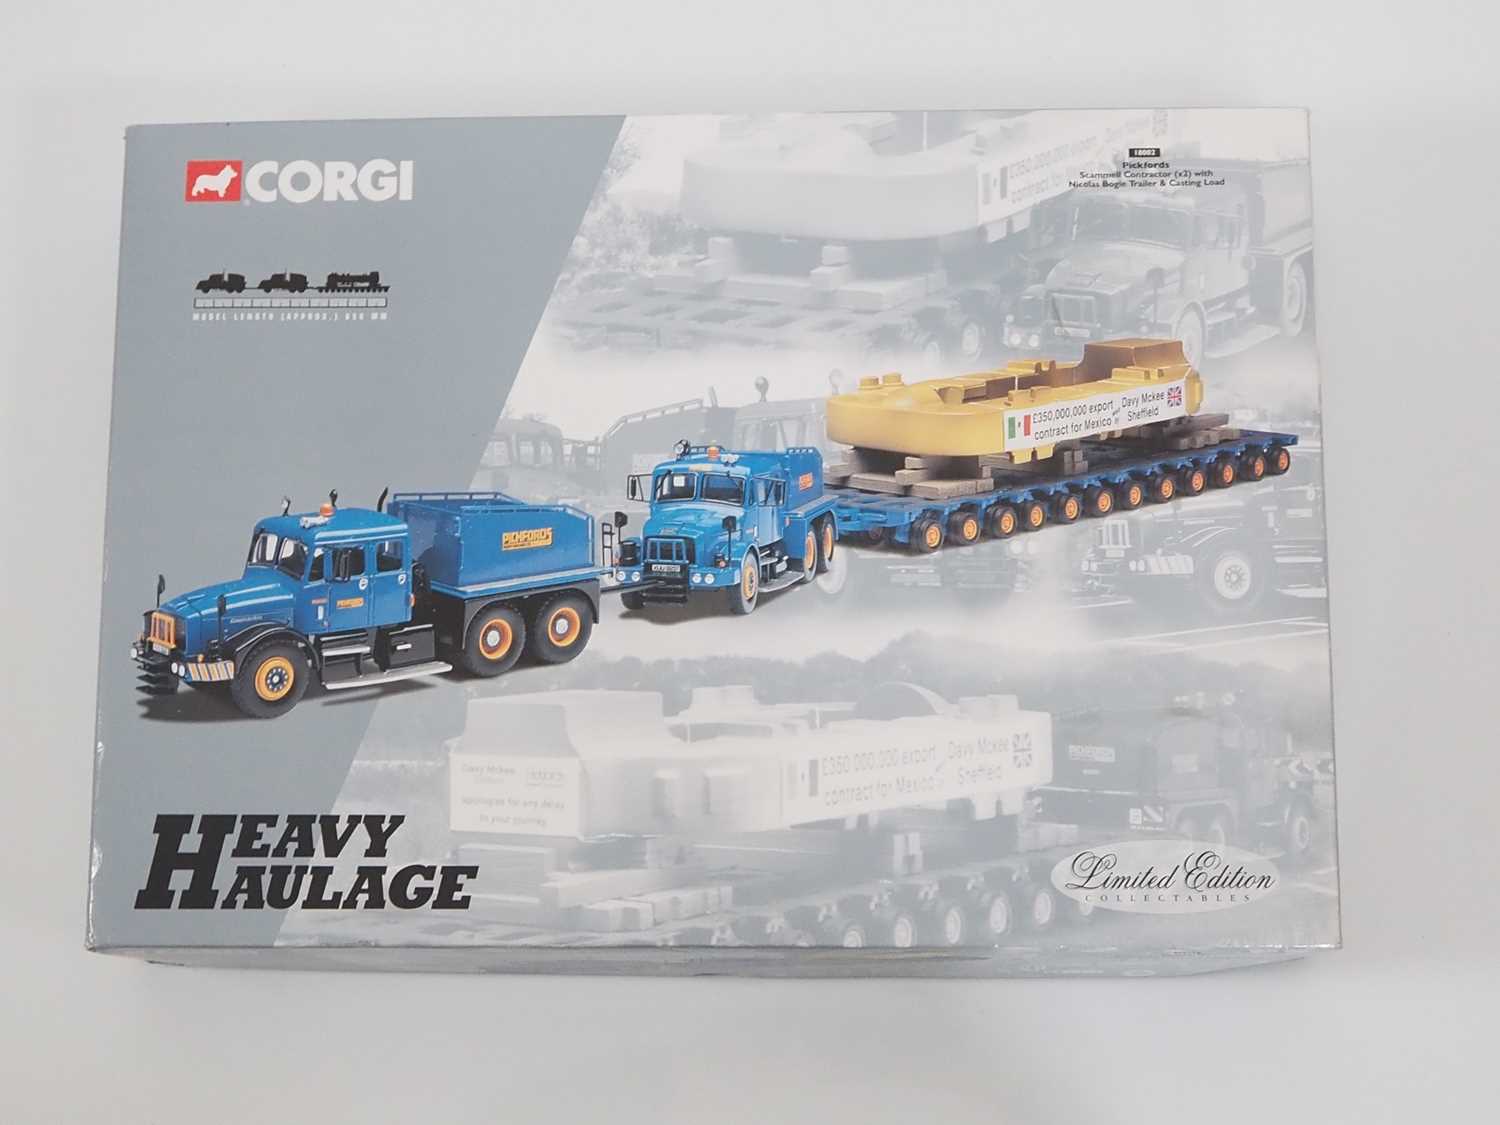 A CORGI 1:50 scale 18002 Heavy Haulage set in Pickford's livery - appears unused - VG/E in G/VG box - Image 4 of 5